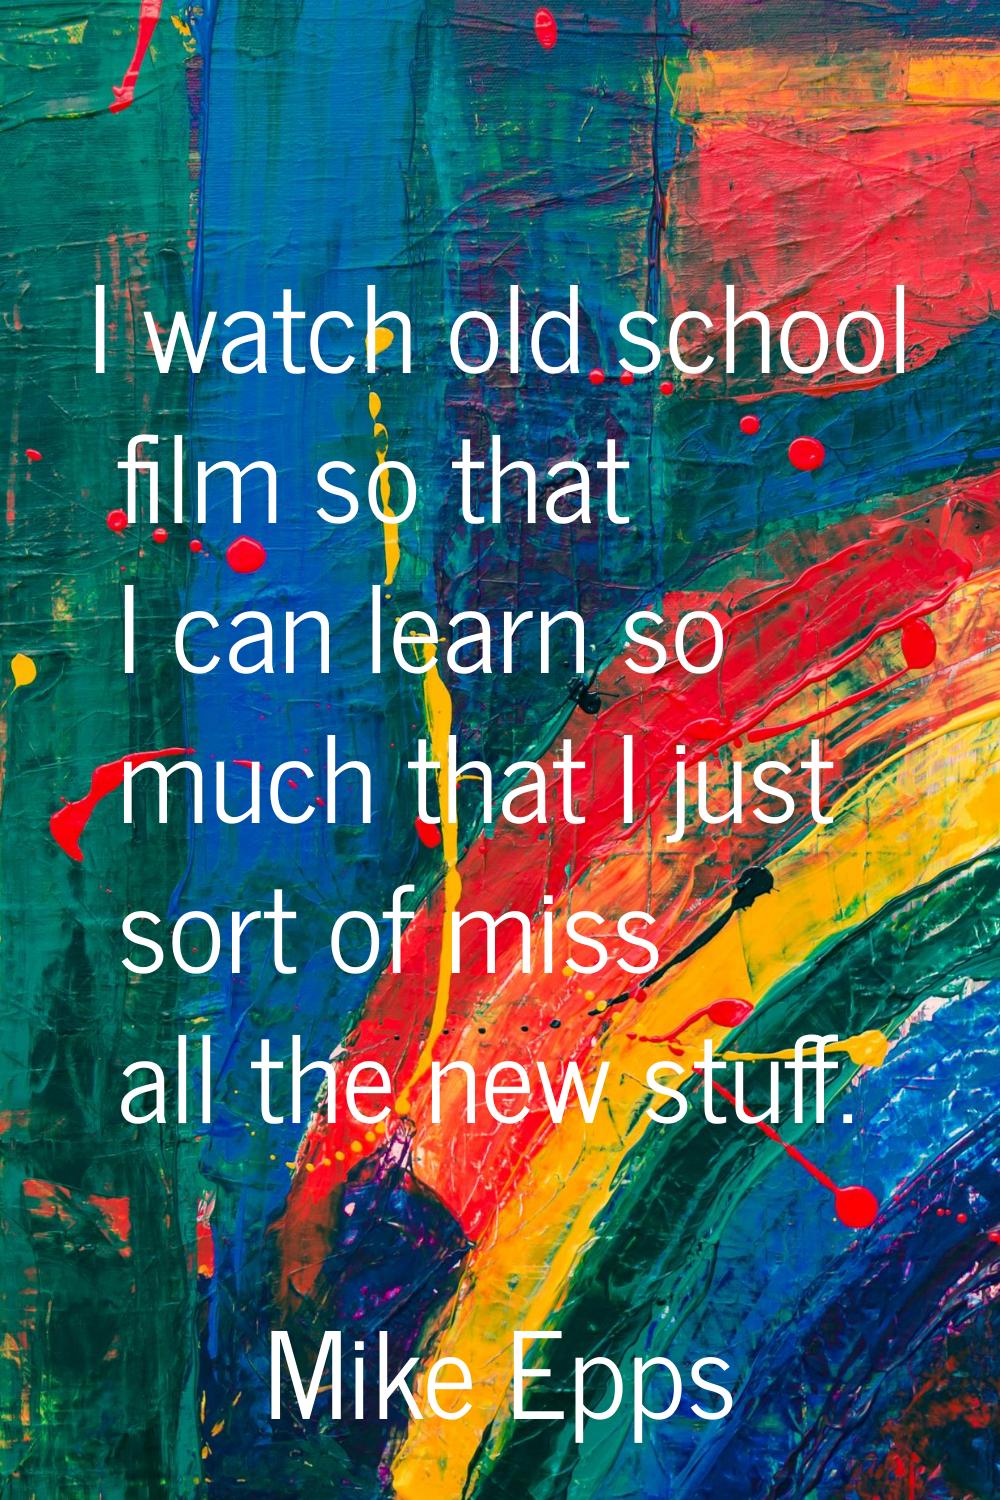 I watch old school film so that I can learn so much that I just sort of miss all the new stuff.